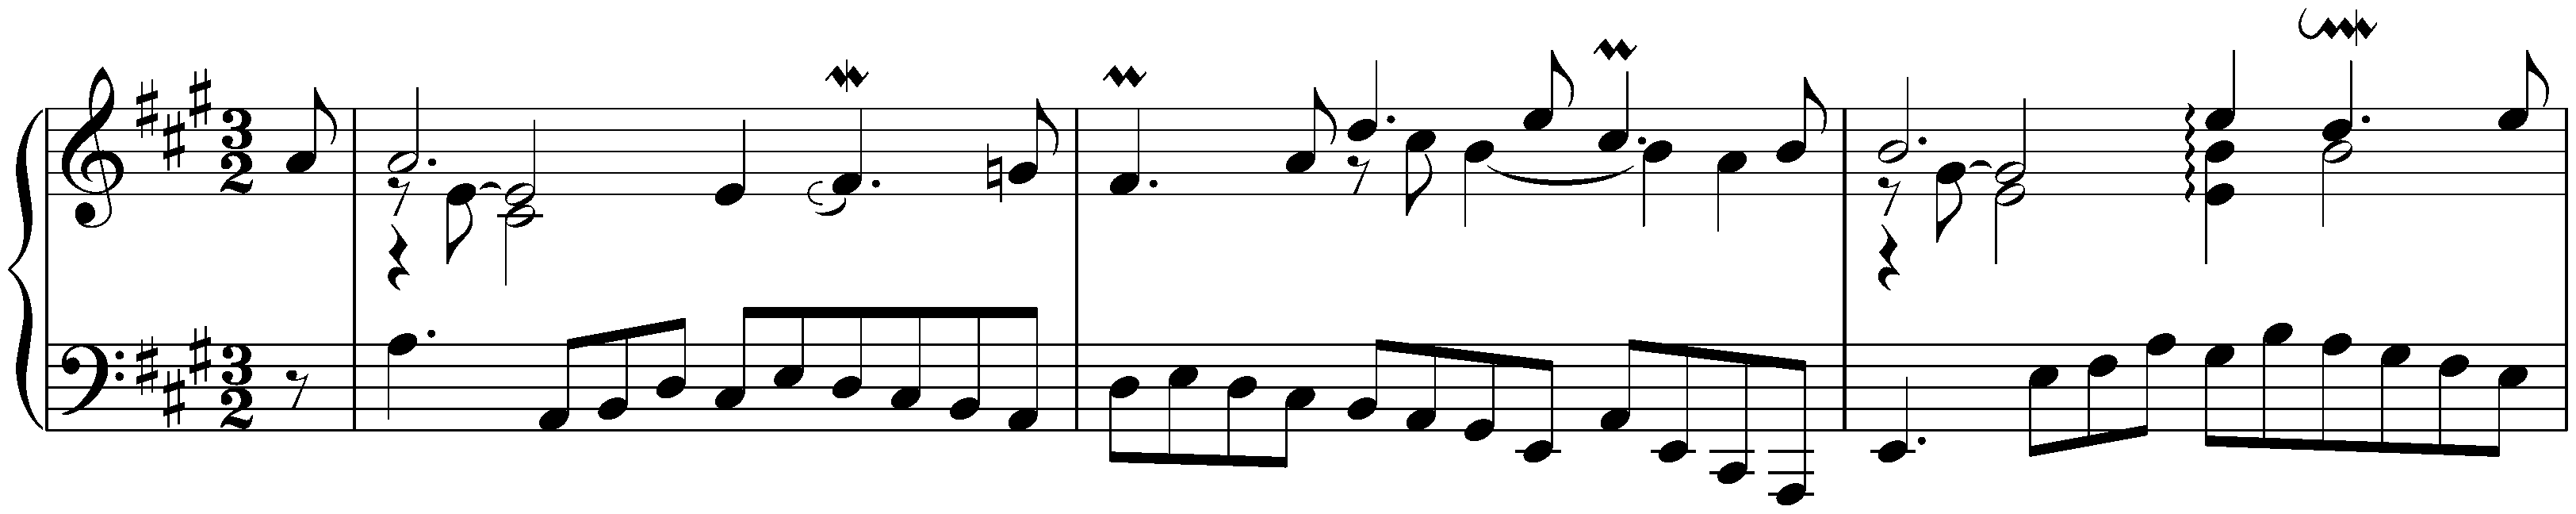 English Suite no. 1 in A major, BWV 806; 4. Courante II – Double I – Double II